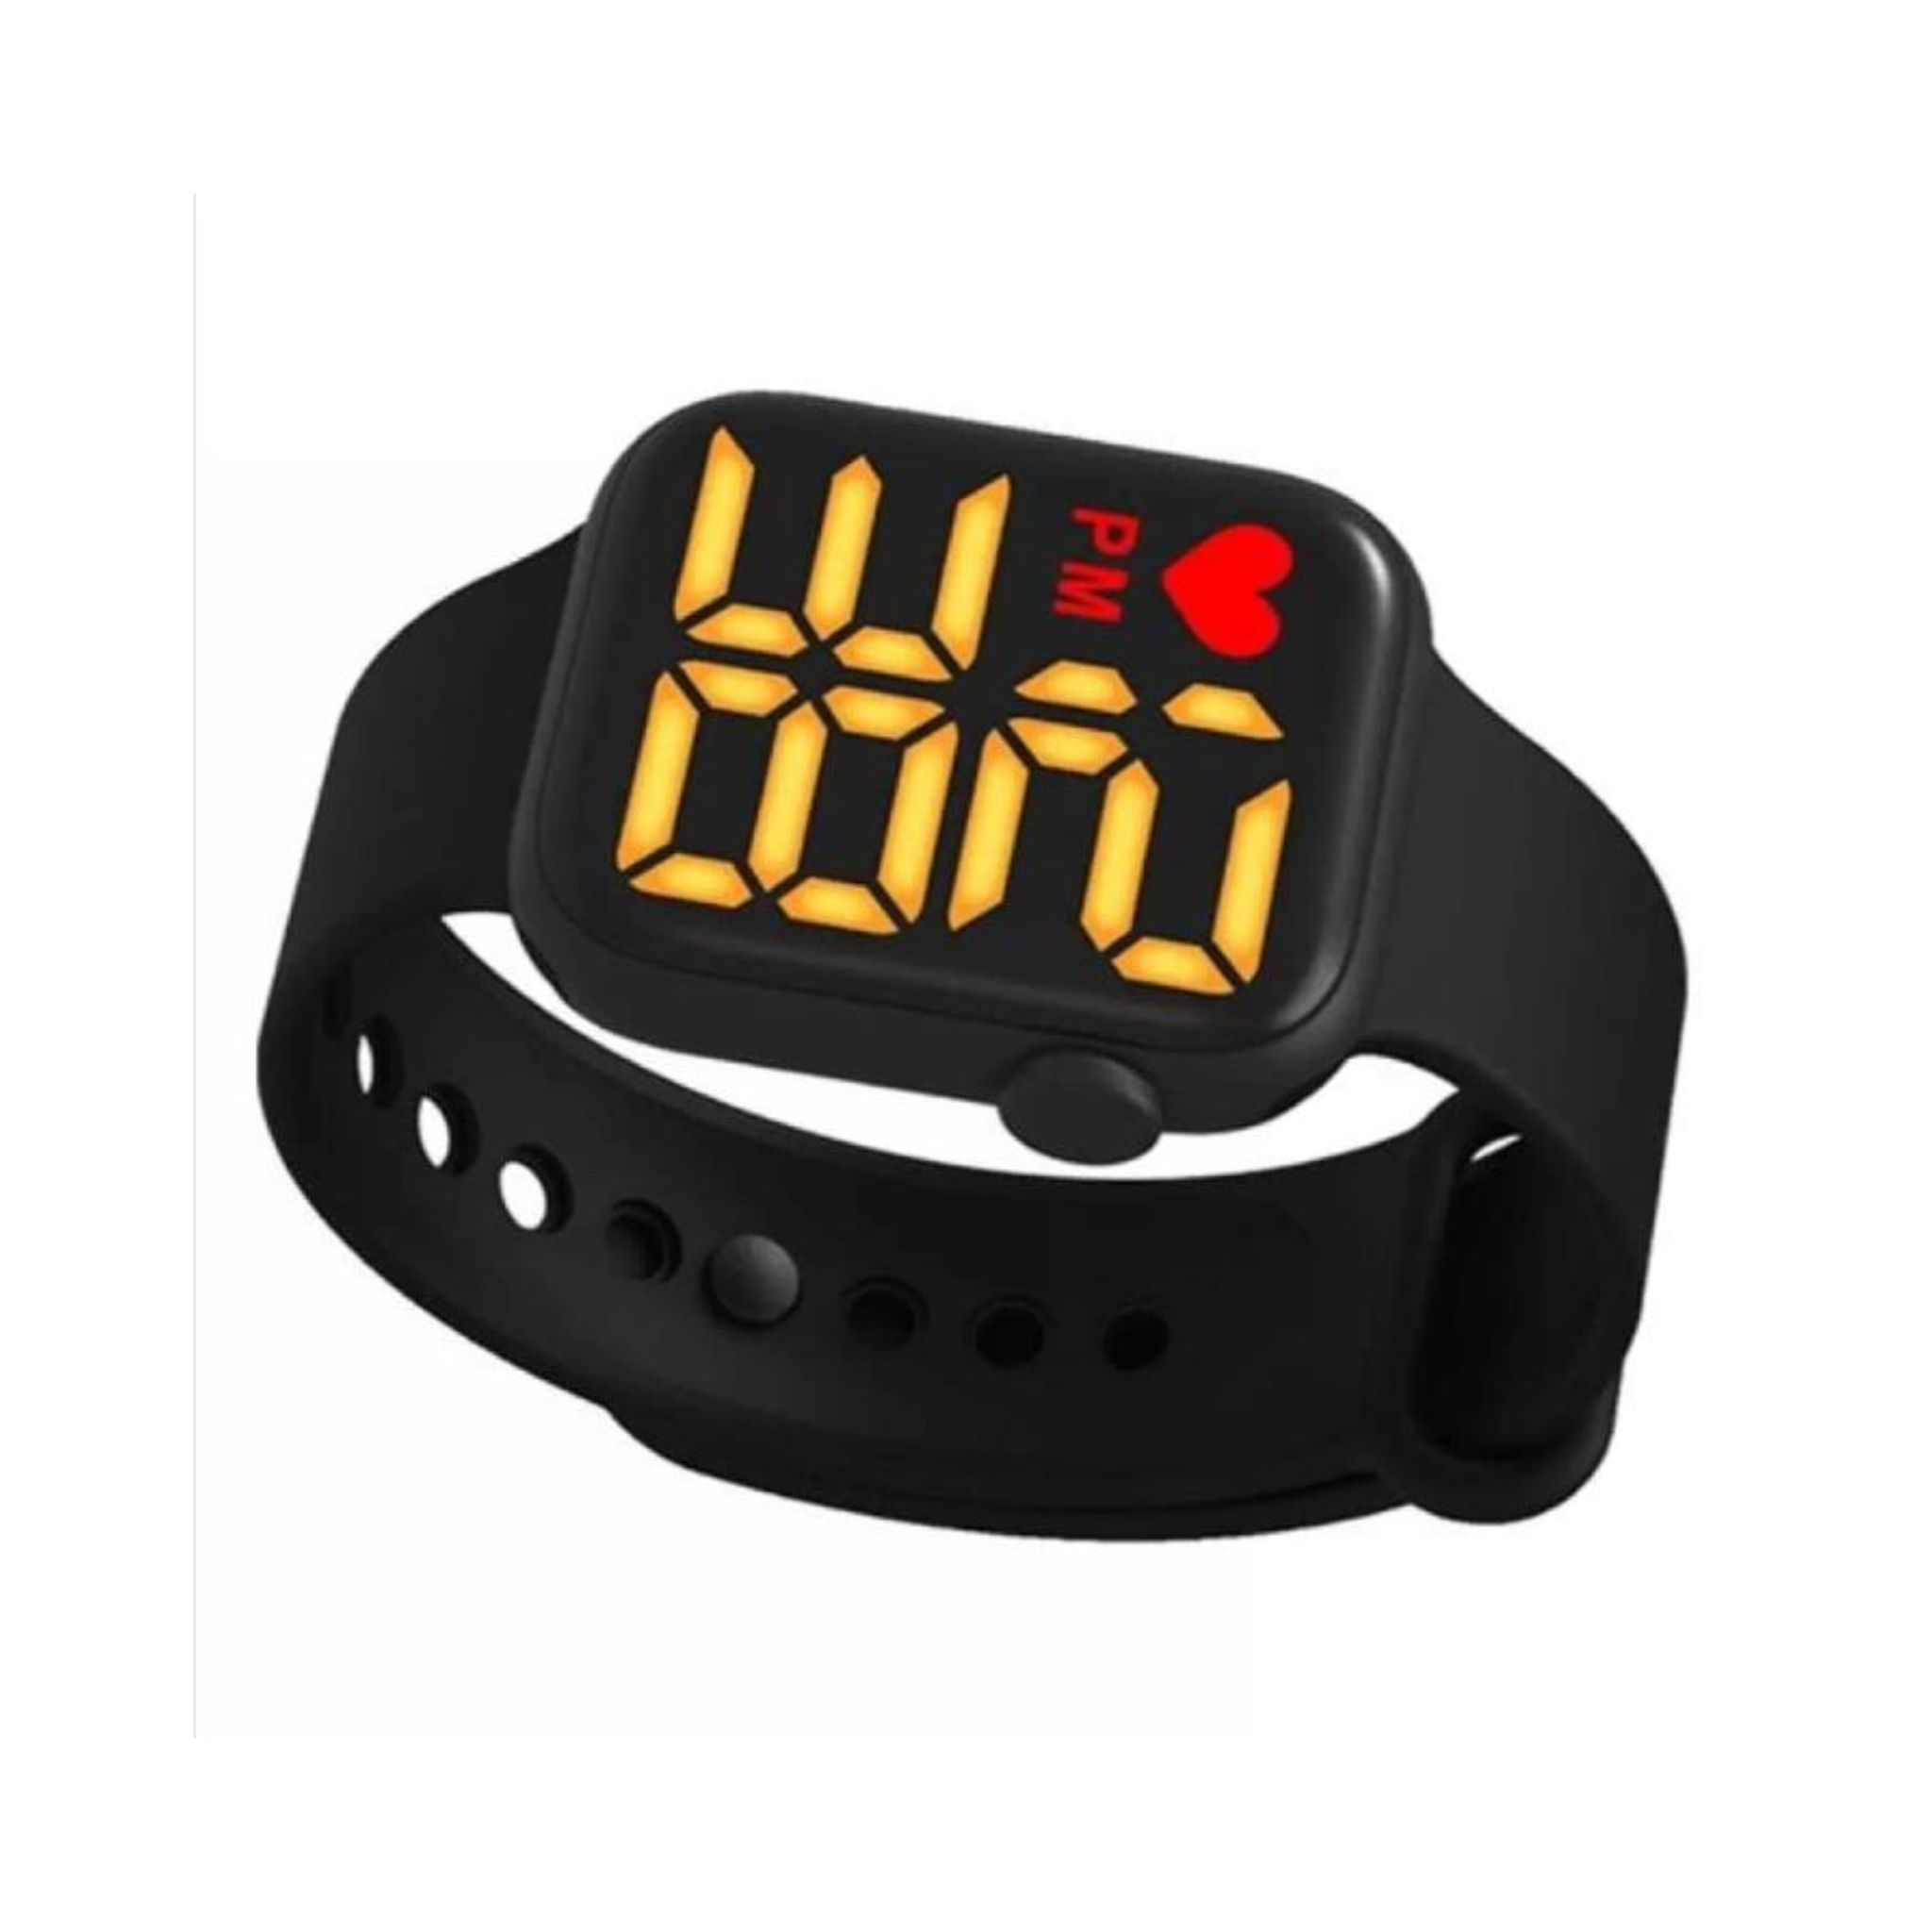 Watch, M3 Touch & Led Display, for Unisex